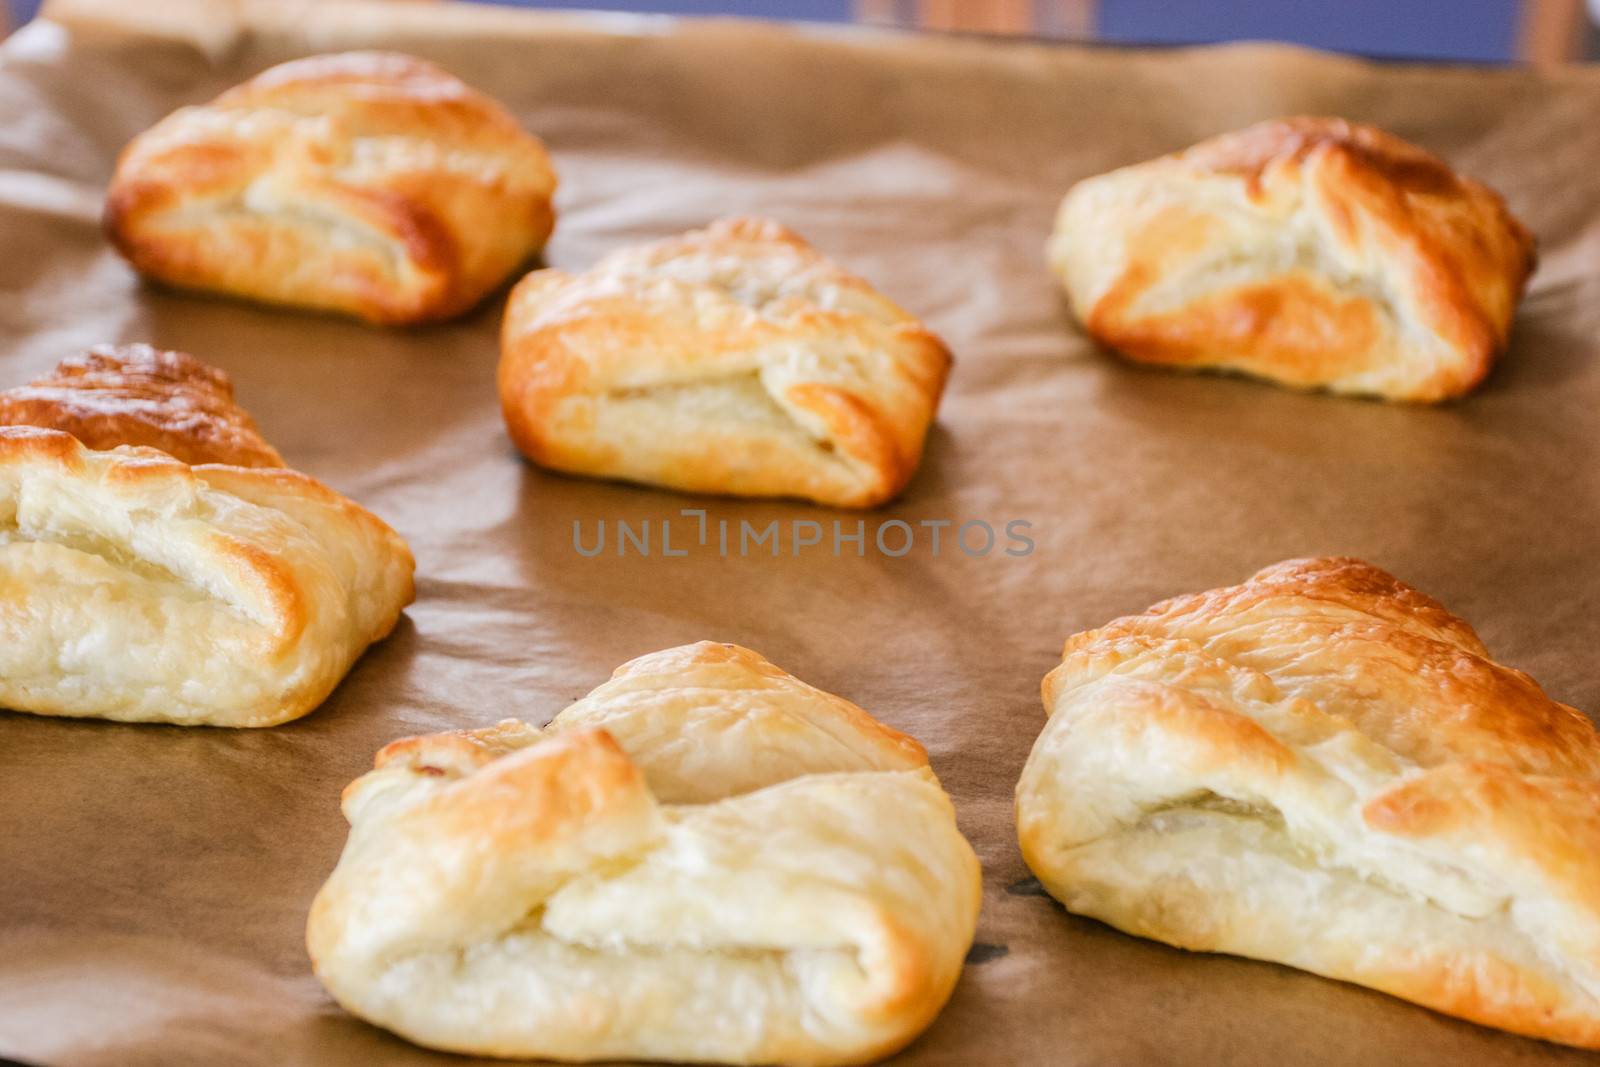 Individual-sized baked or fried buns stuffed with a variety of fillings.